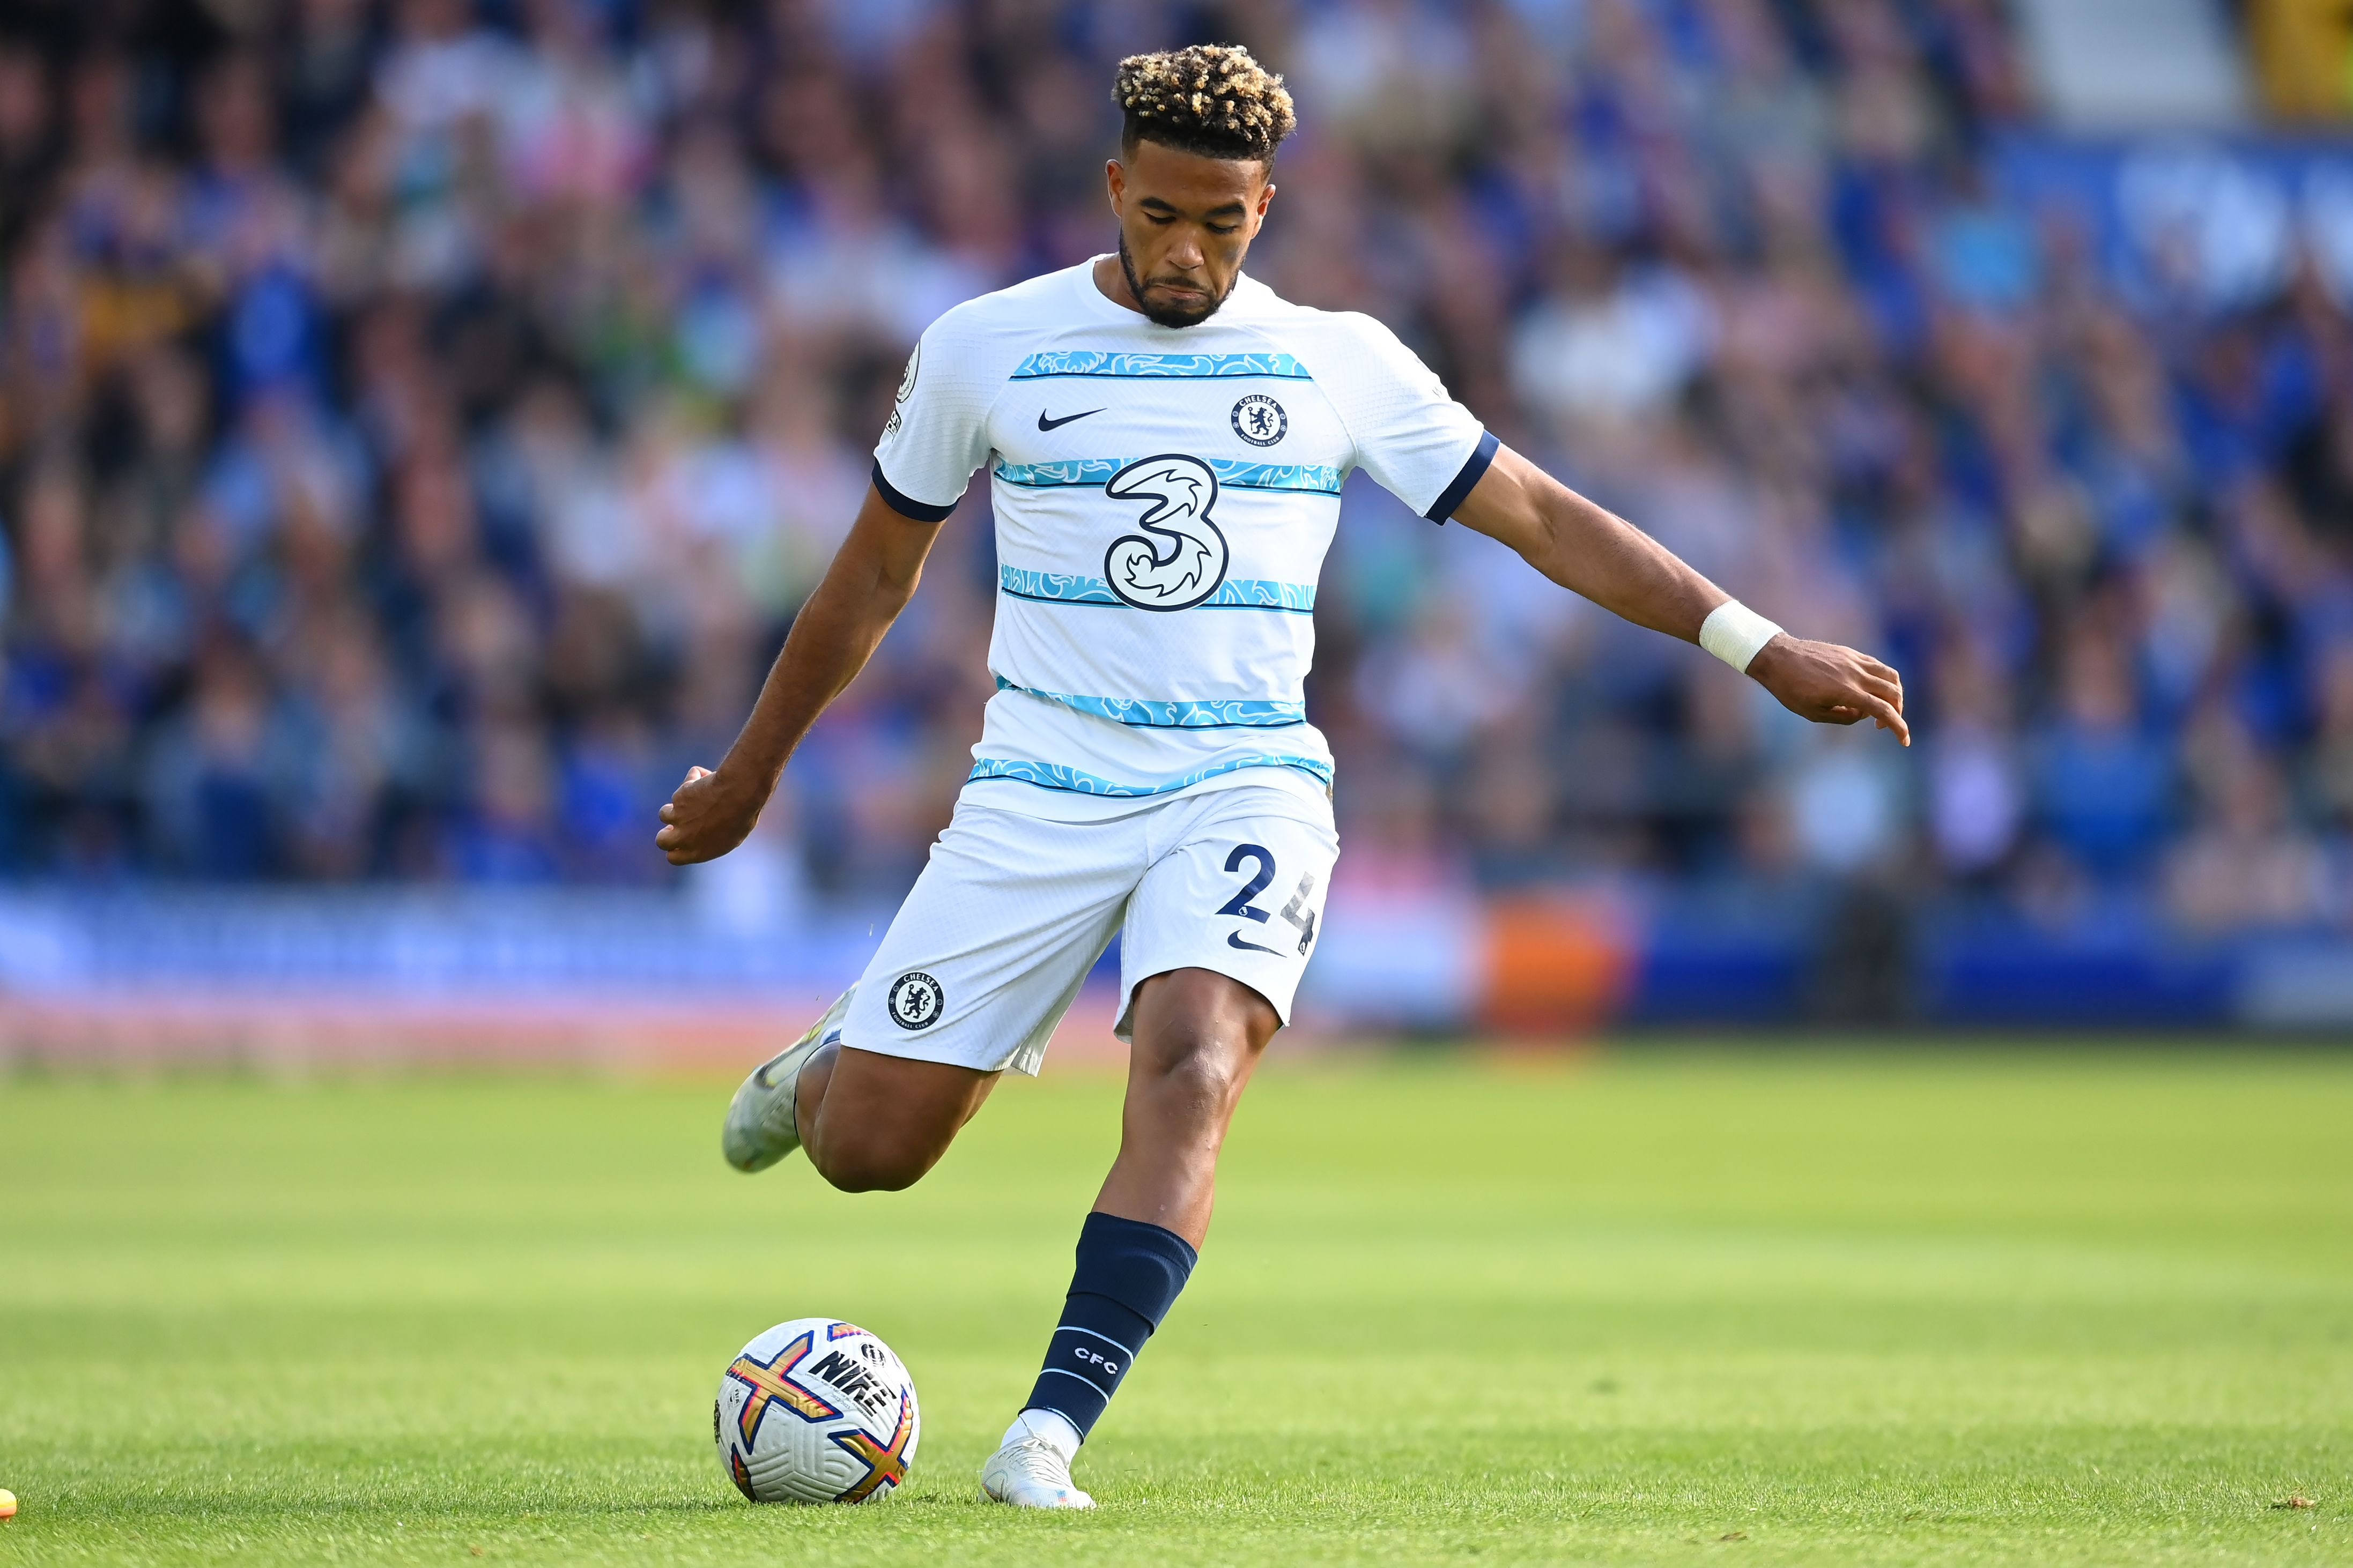 Reece James of Chelsea in action during the Premier League match